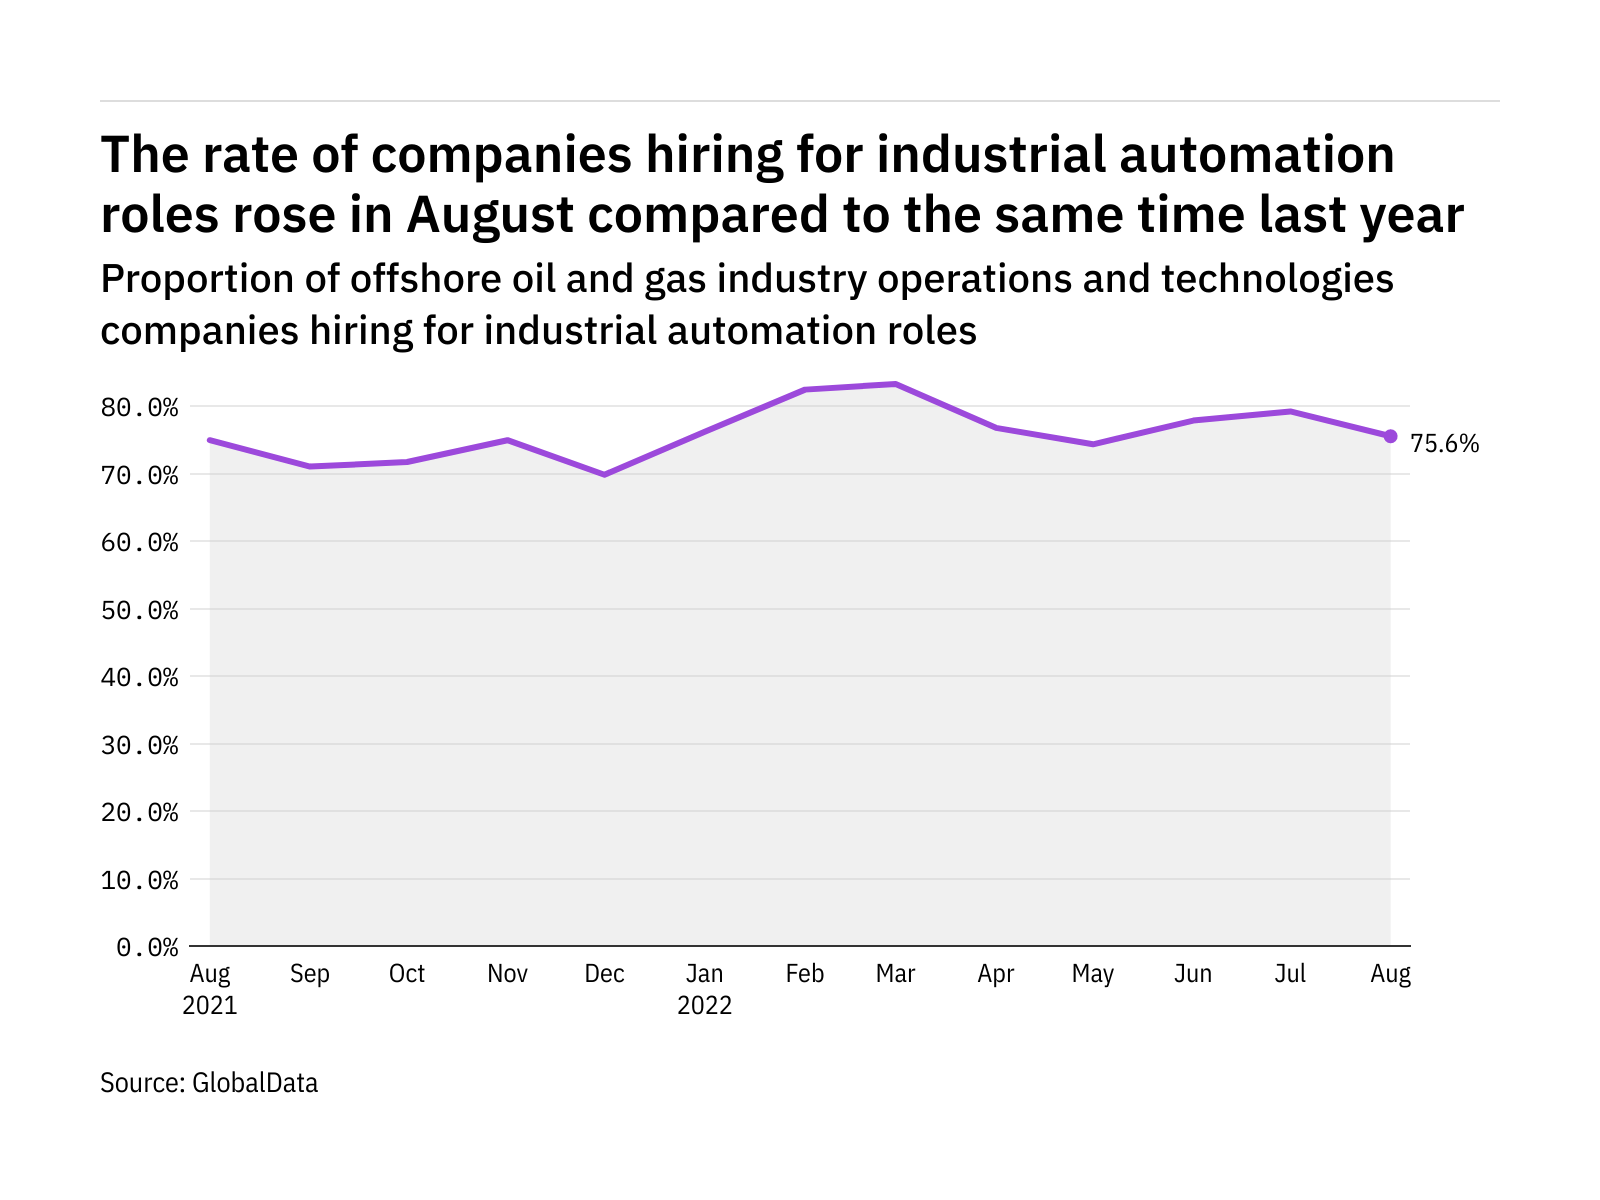 Industrial automation hiring levels in the offshore industry rose in August 2022